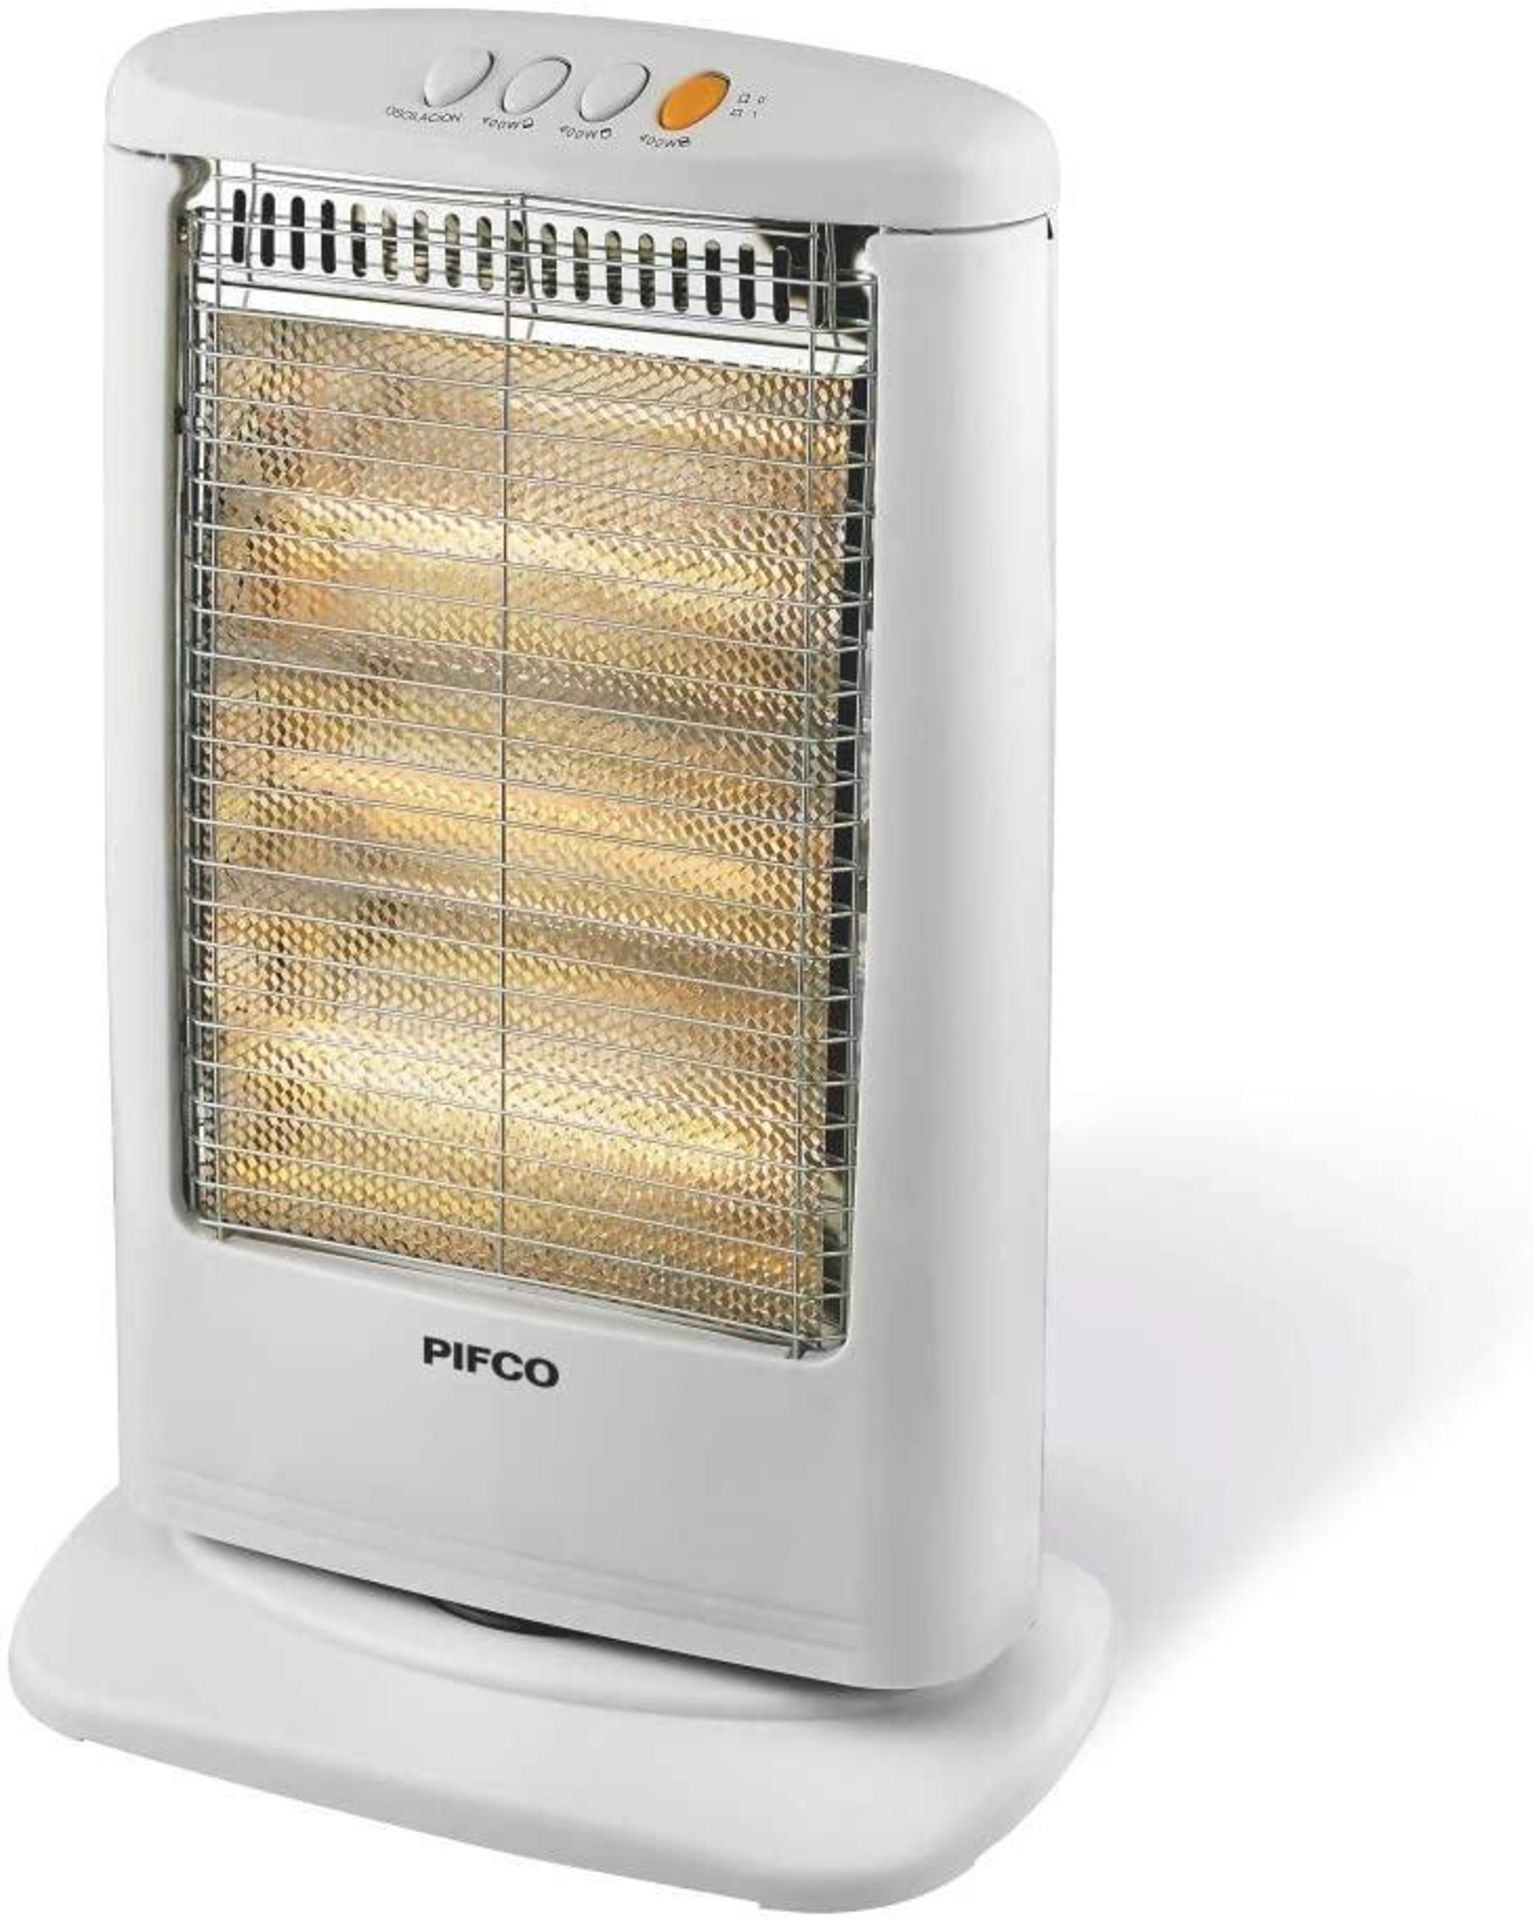 Pifco Portable Halogen Heater with 3 Heat Settings, Safety Cut Off Switch, 70 Degree £24.99 RRP